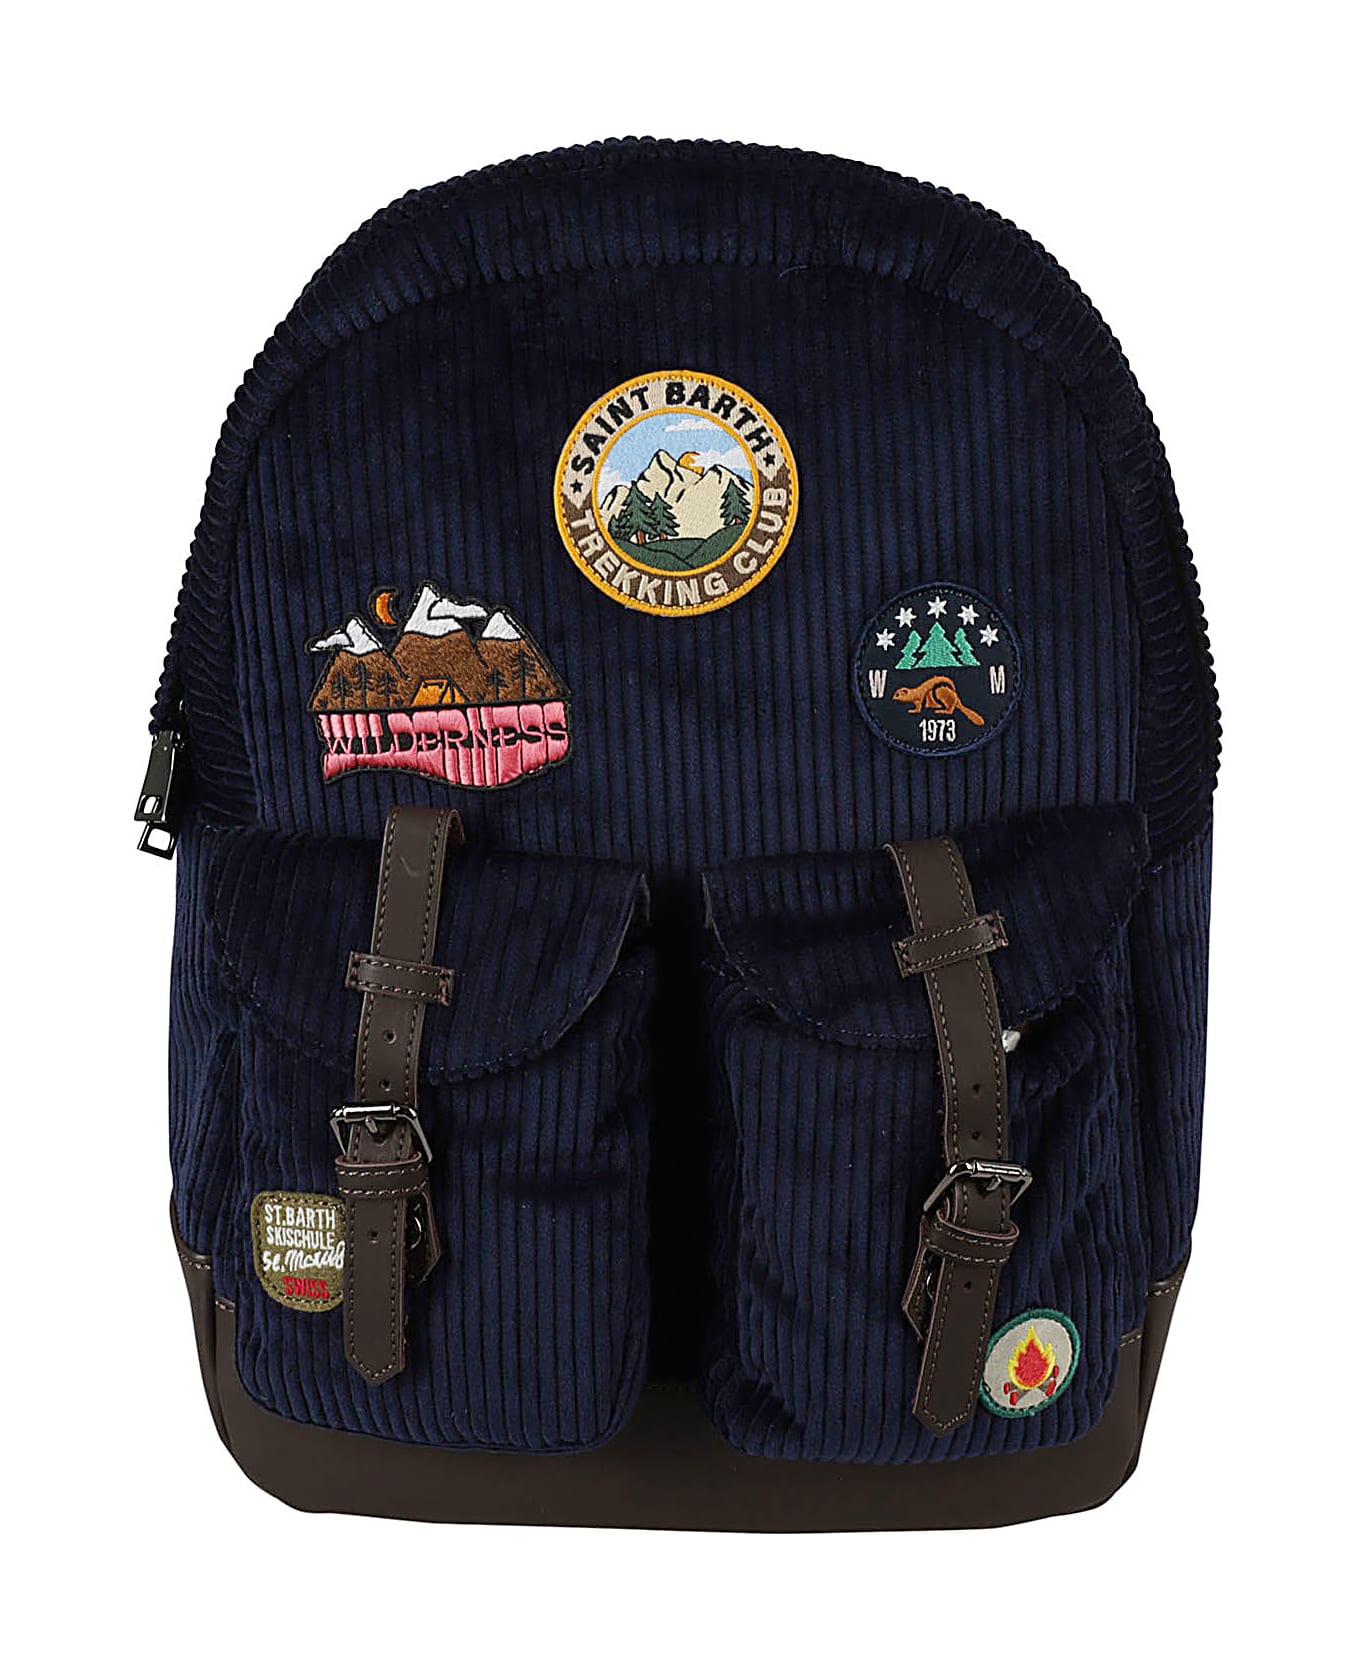 MC2 Saint Barth Backpack - Patch Corduroy バックパック